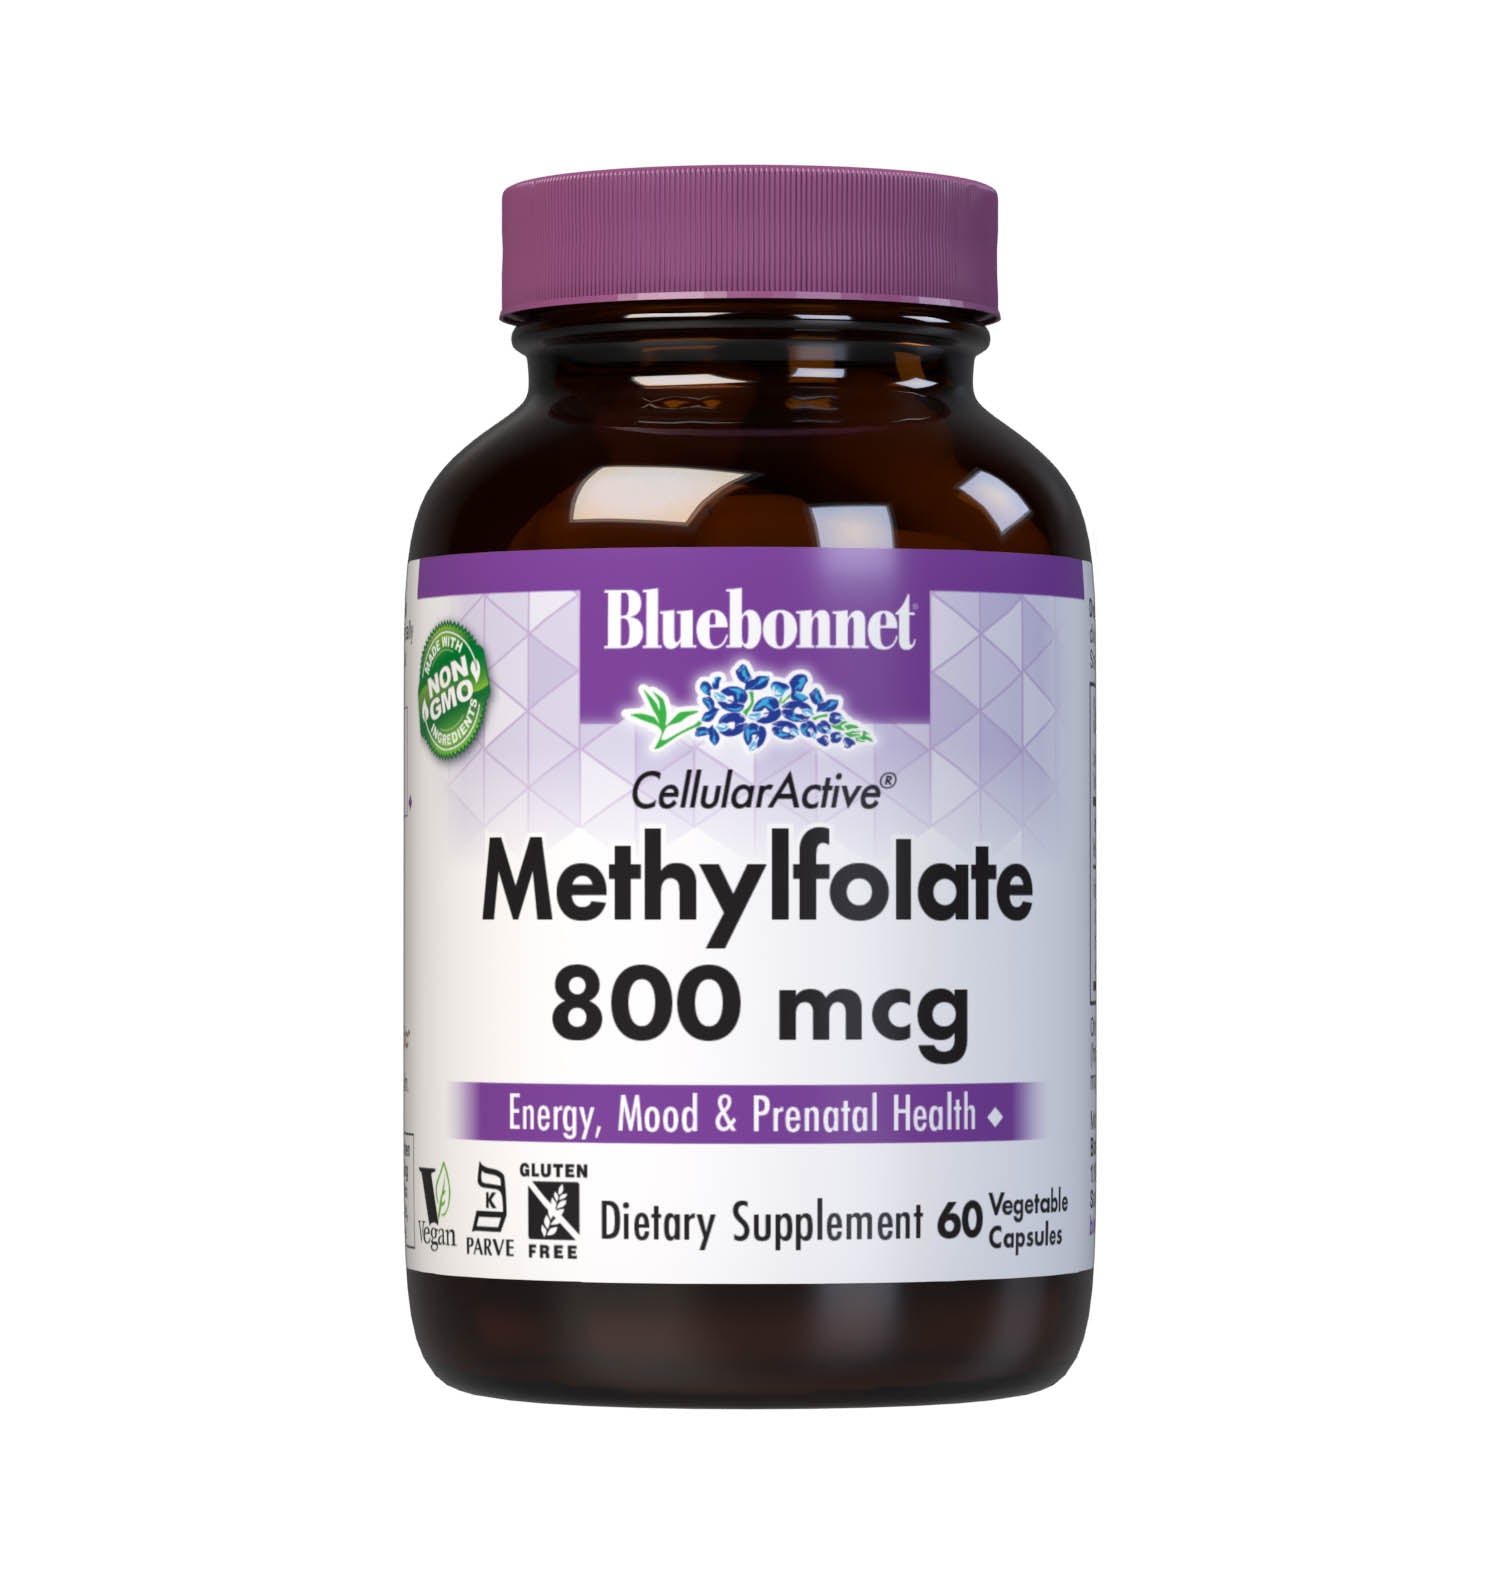 Bluebonnet’s CellularActive Methylfolate 800 mcg Vegetable Capsules are formulated with Quatrefolic, a patented and clinically studied coenzyme form of folate for prenatal health, energy and vitality, as well as mood support. #size_60 count